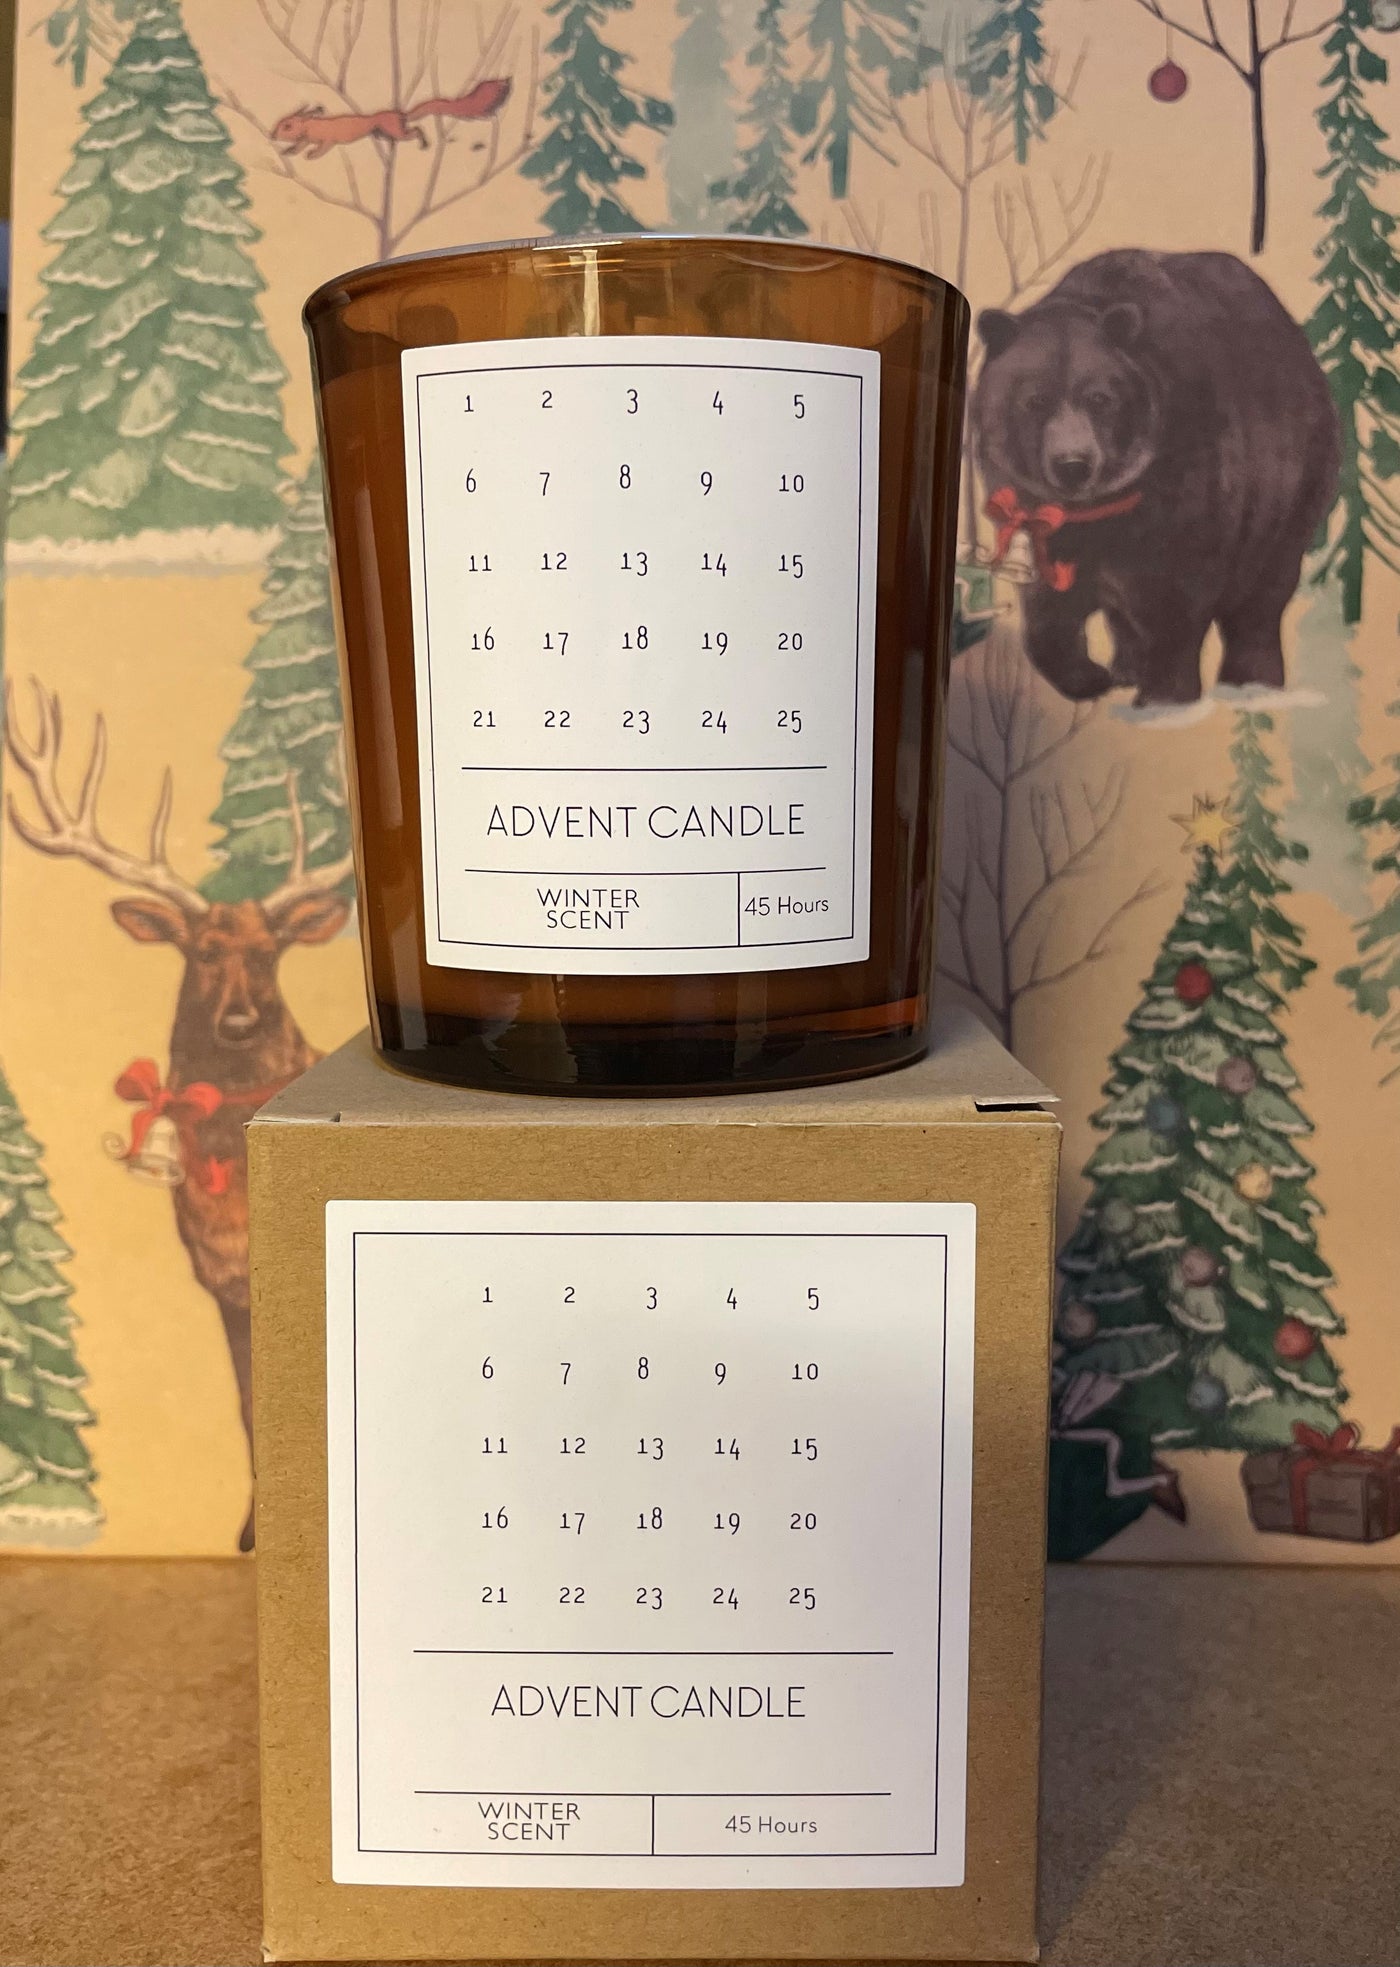 Advent Candle Winter Scent